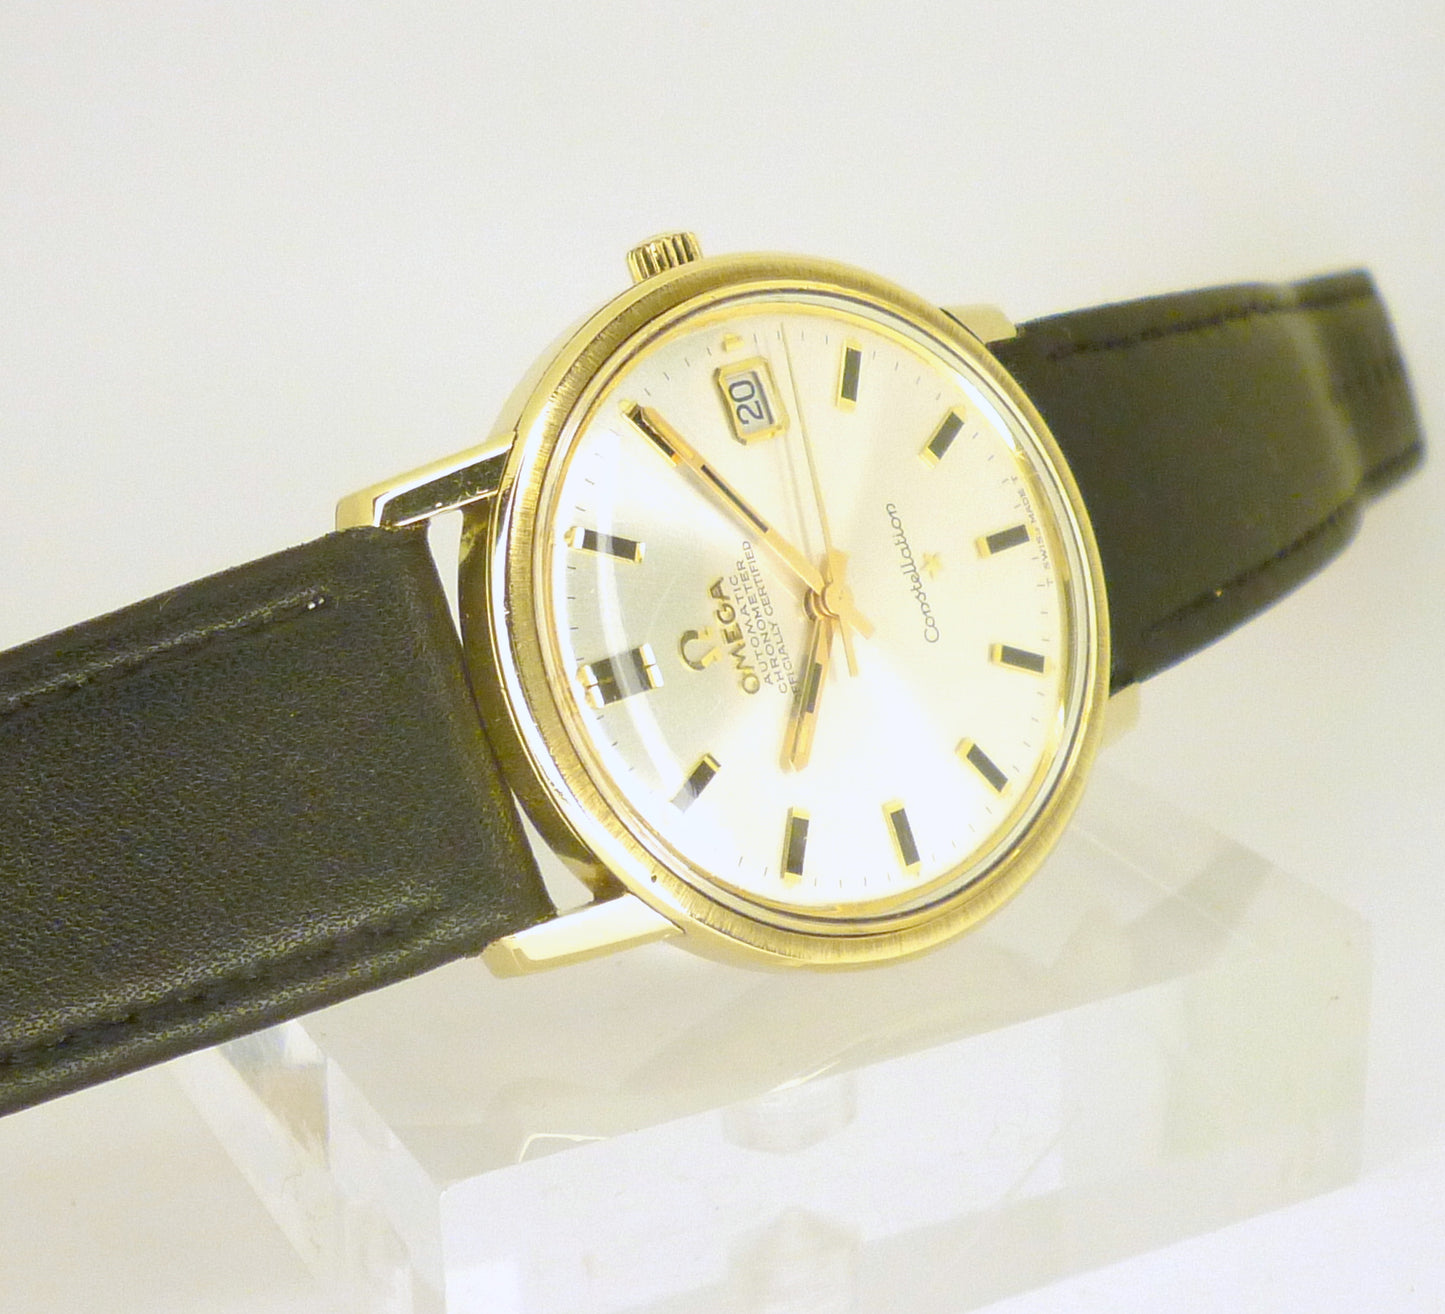 Mint 1968 Omega Constellation Chronometer Gold Capped 168.018 Cal 564 35mm